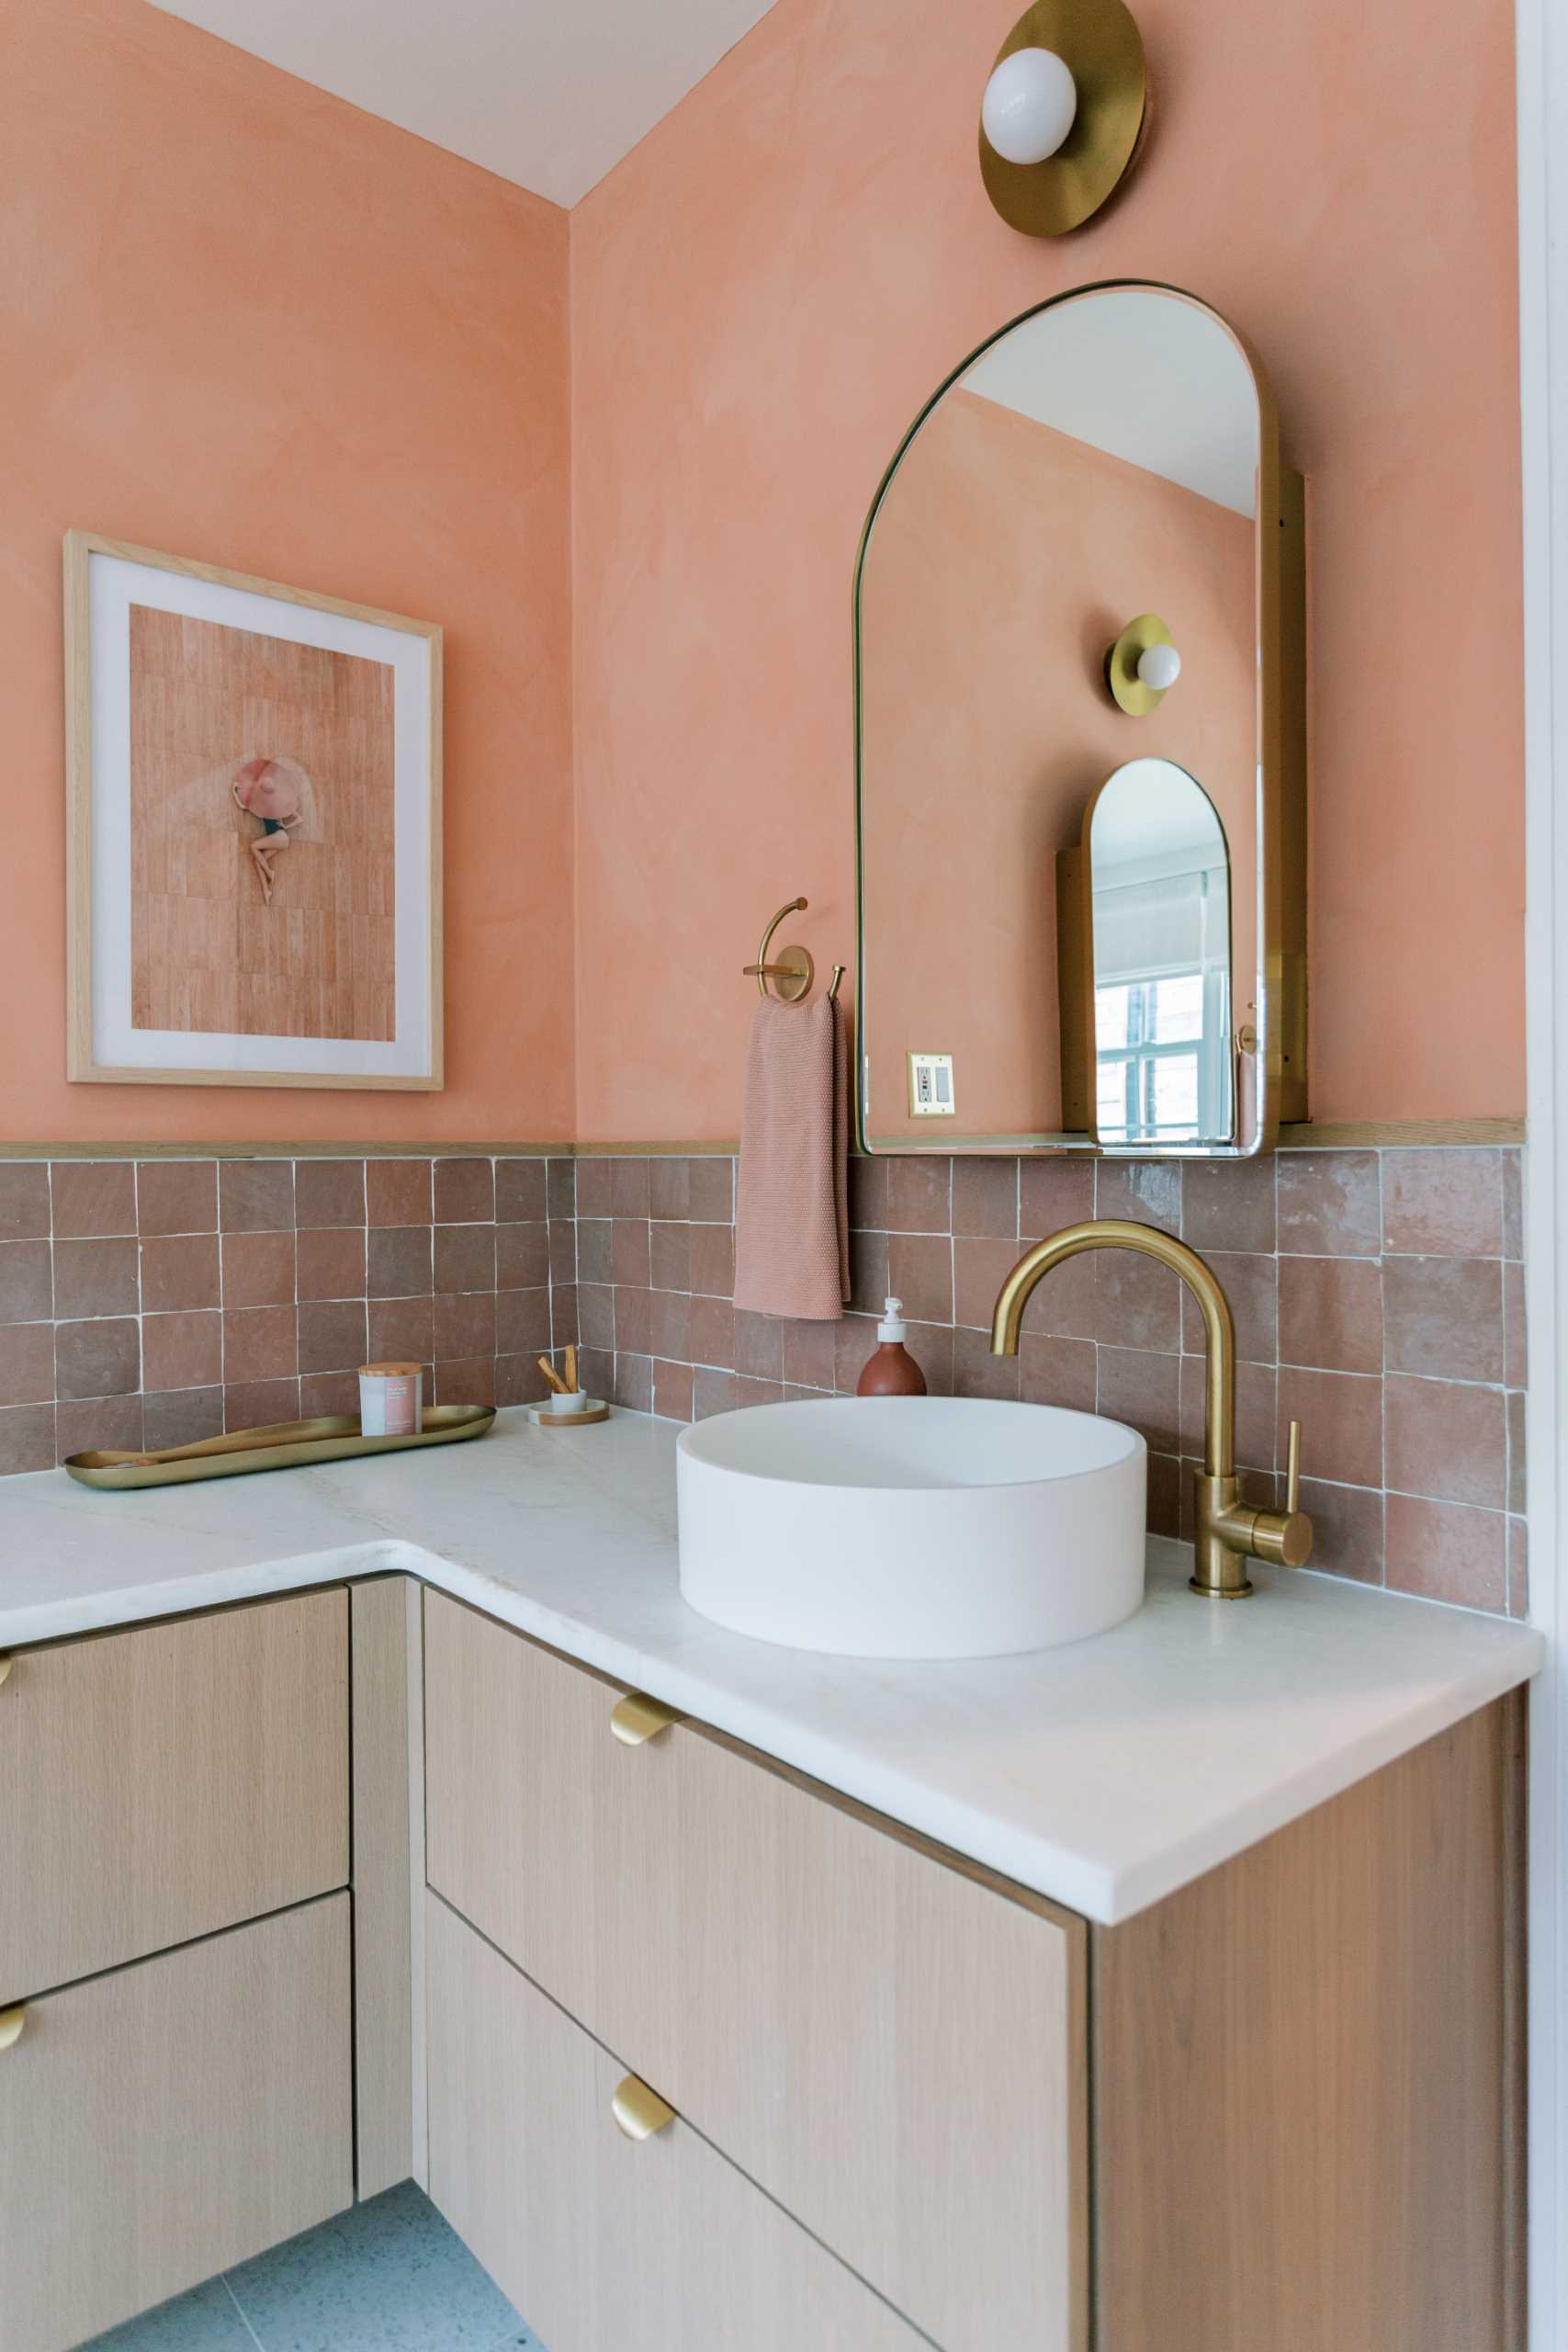 A contemporary bathroom renovation received a new corner vanity with double sinks, new tiles, and colorful walls.